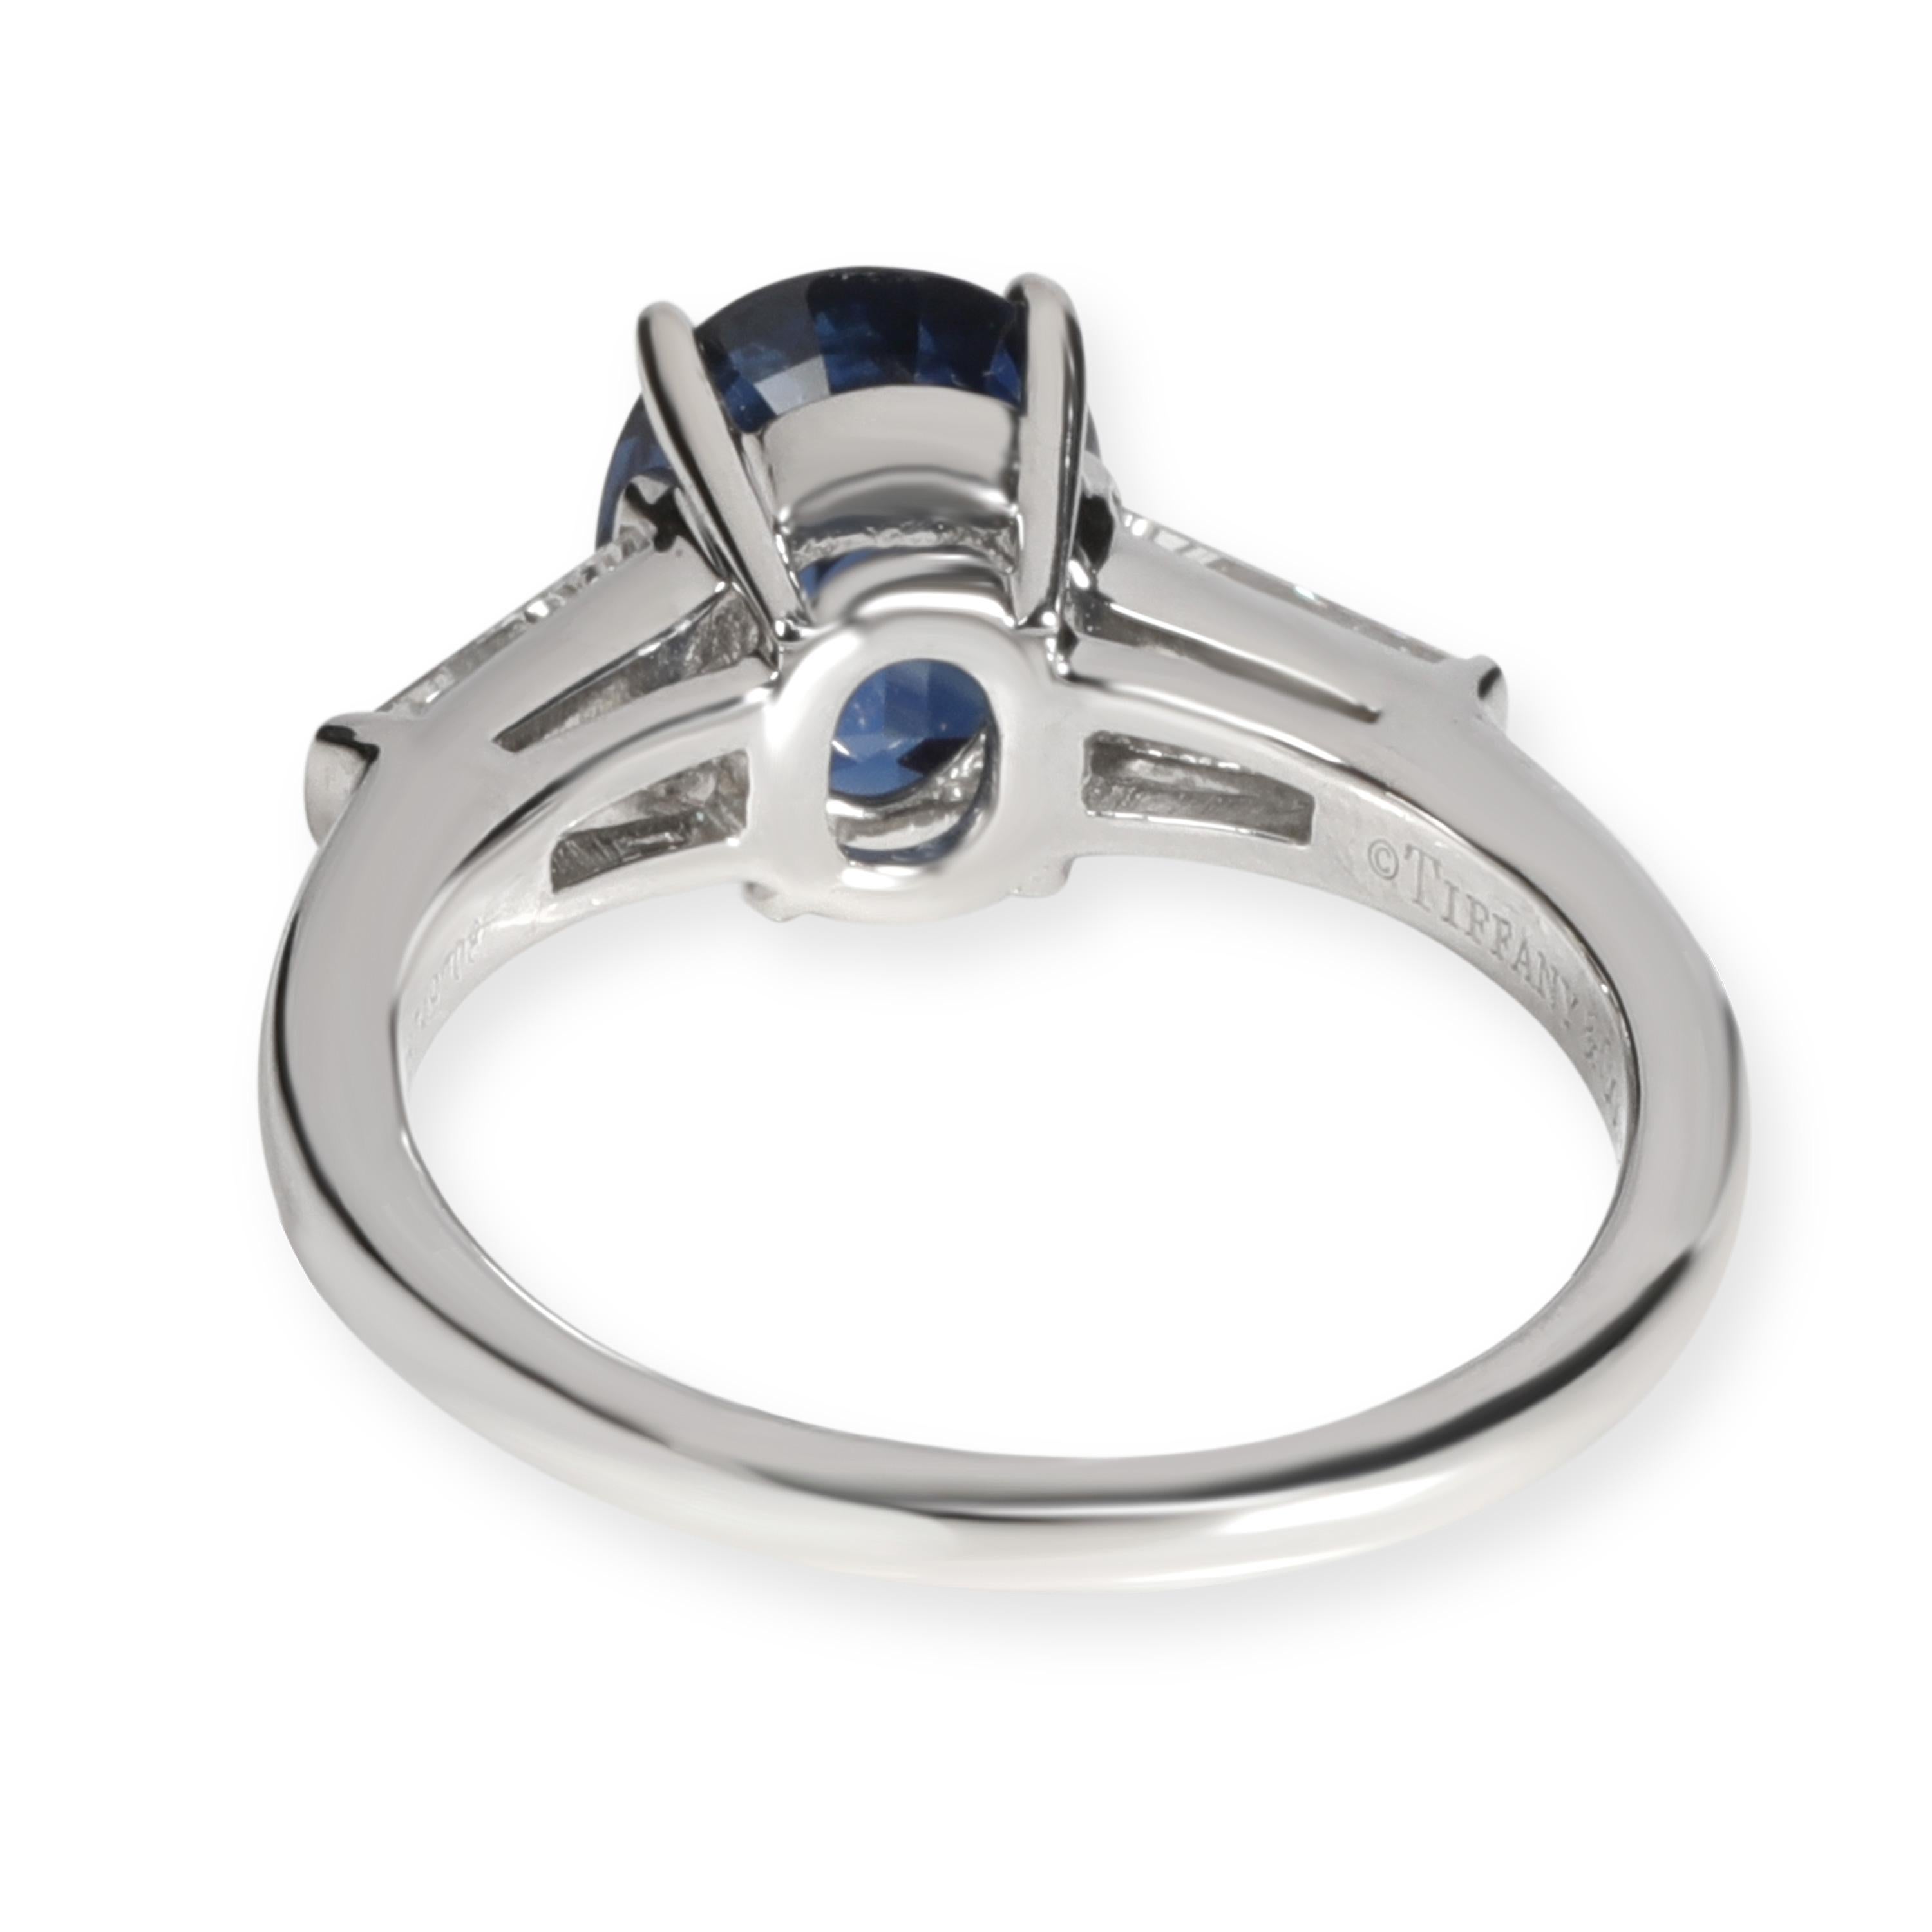 Tiffany & Co. Three Stone Sapphire & Diamond Ring in Platinum 0.50 CTW

PRIMARY DETAILS
SKU: 106130
Listing Title: Tiffany & Co. Three Stone Sapphire & Diamond Ring in Platinum 0.50 CTW
Condition Description: Retails for 14,100 USD. In excellent